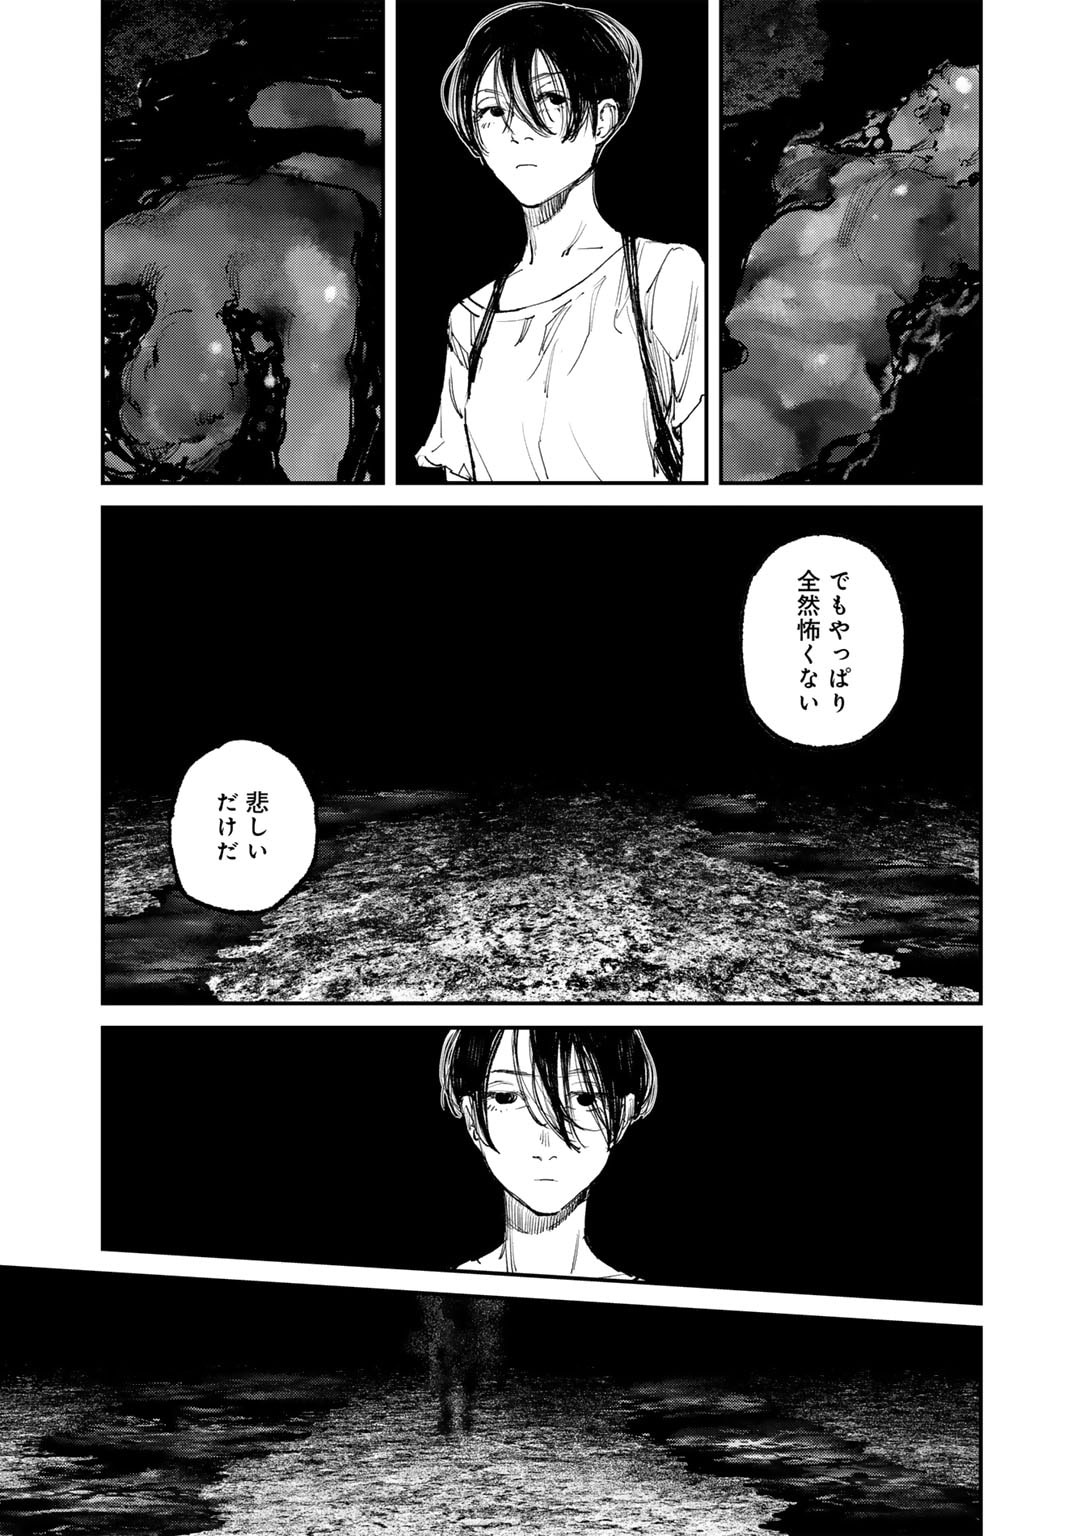 Kanata Is Into More Darker - Chapter 6 - Page 19